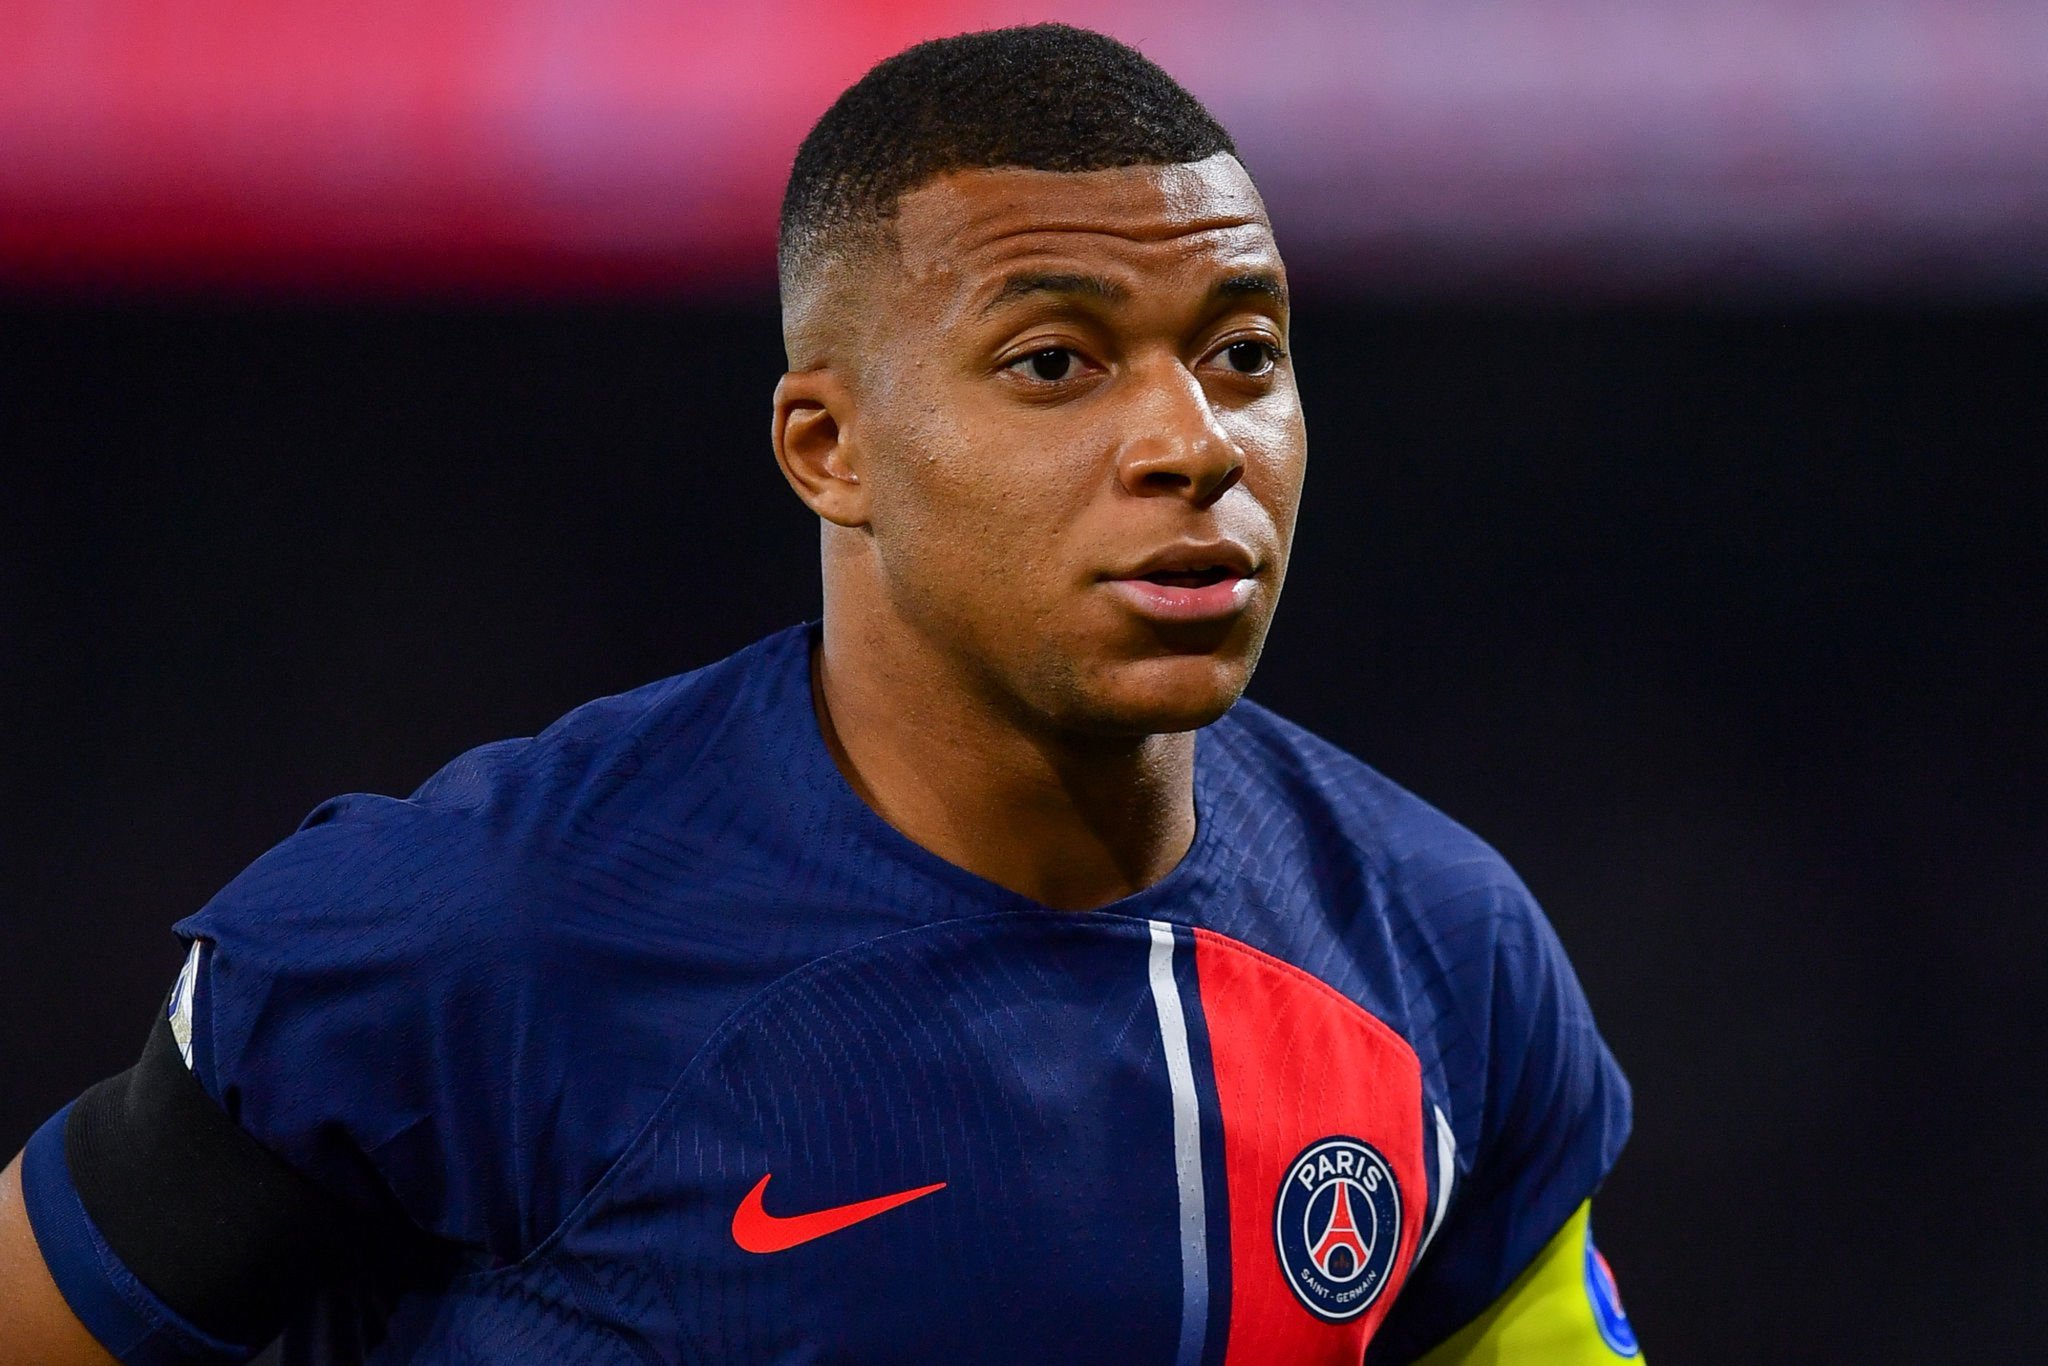 Liverpool join the race for Mbappe's signature 17